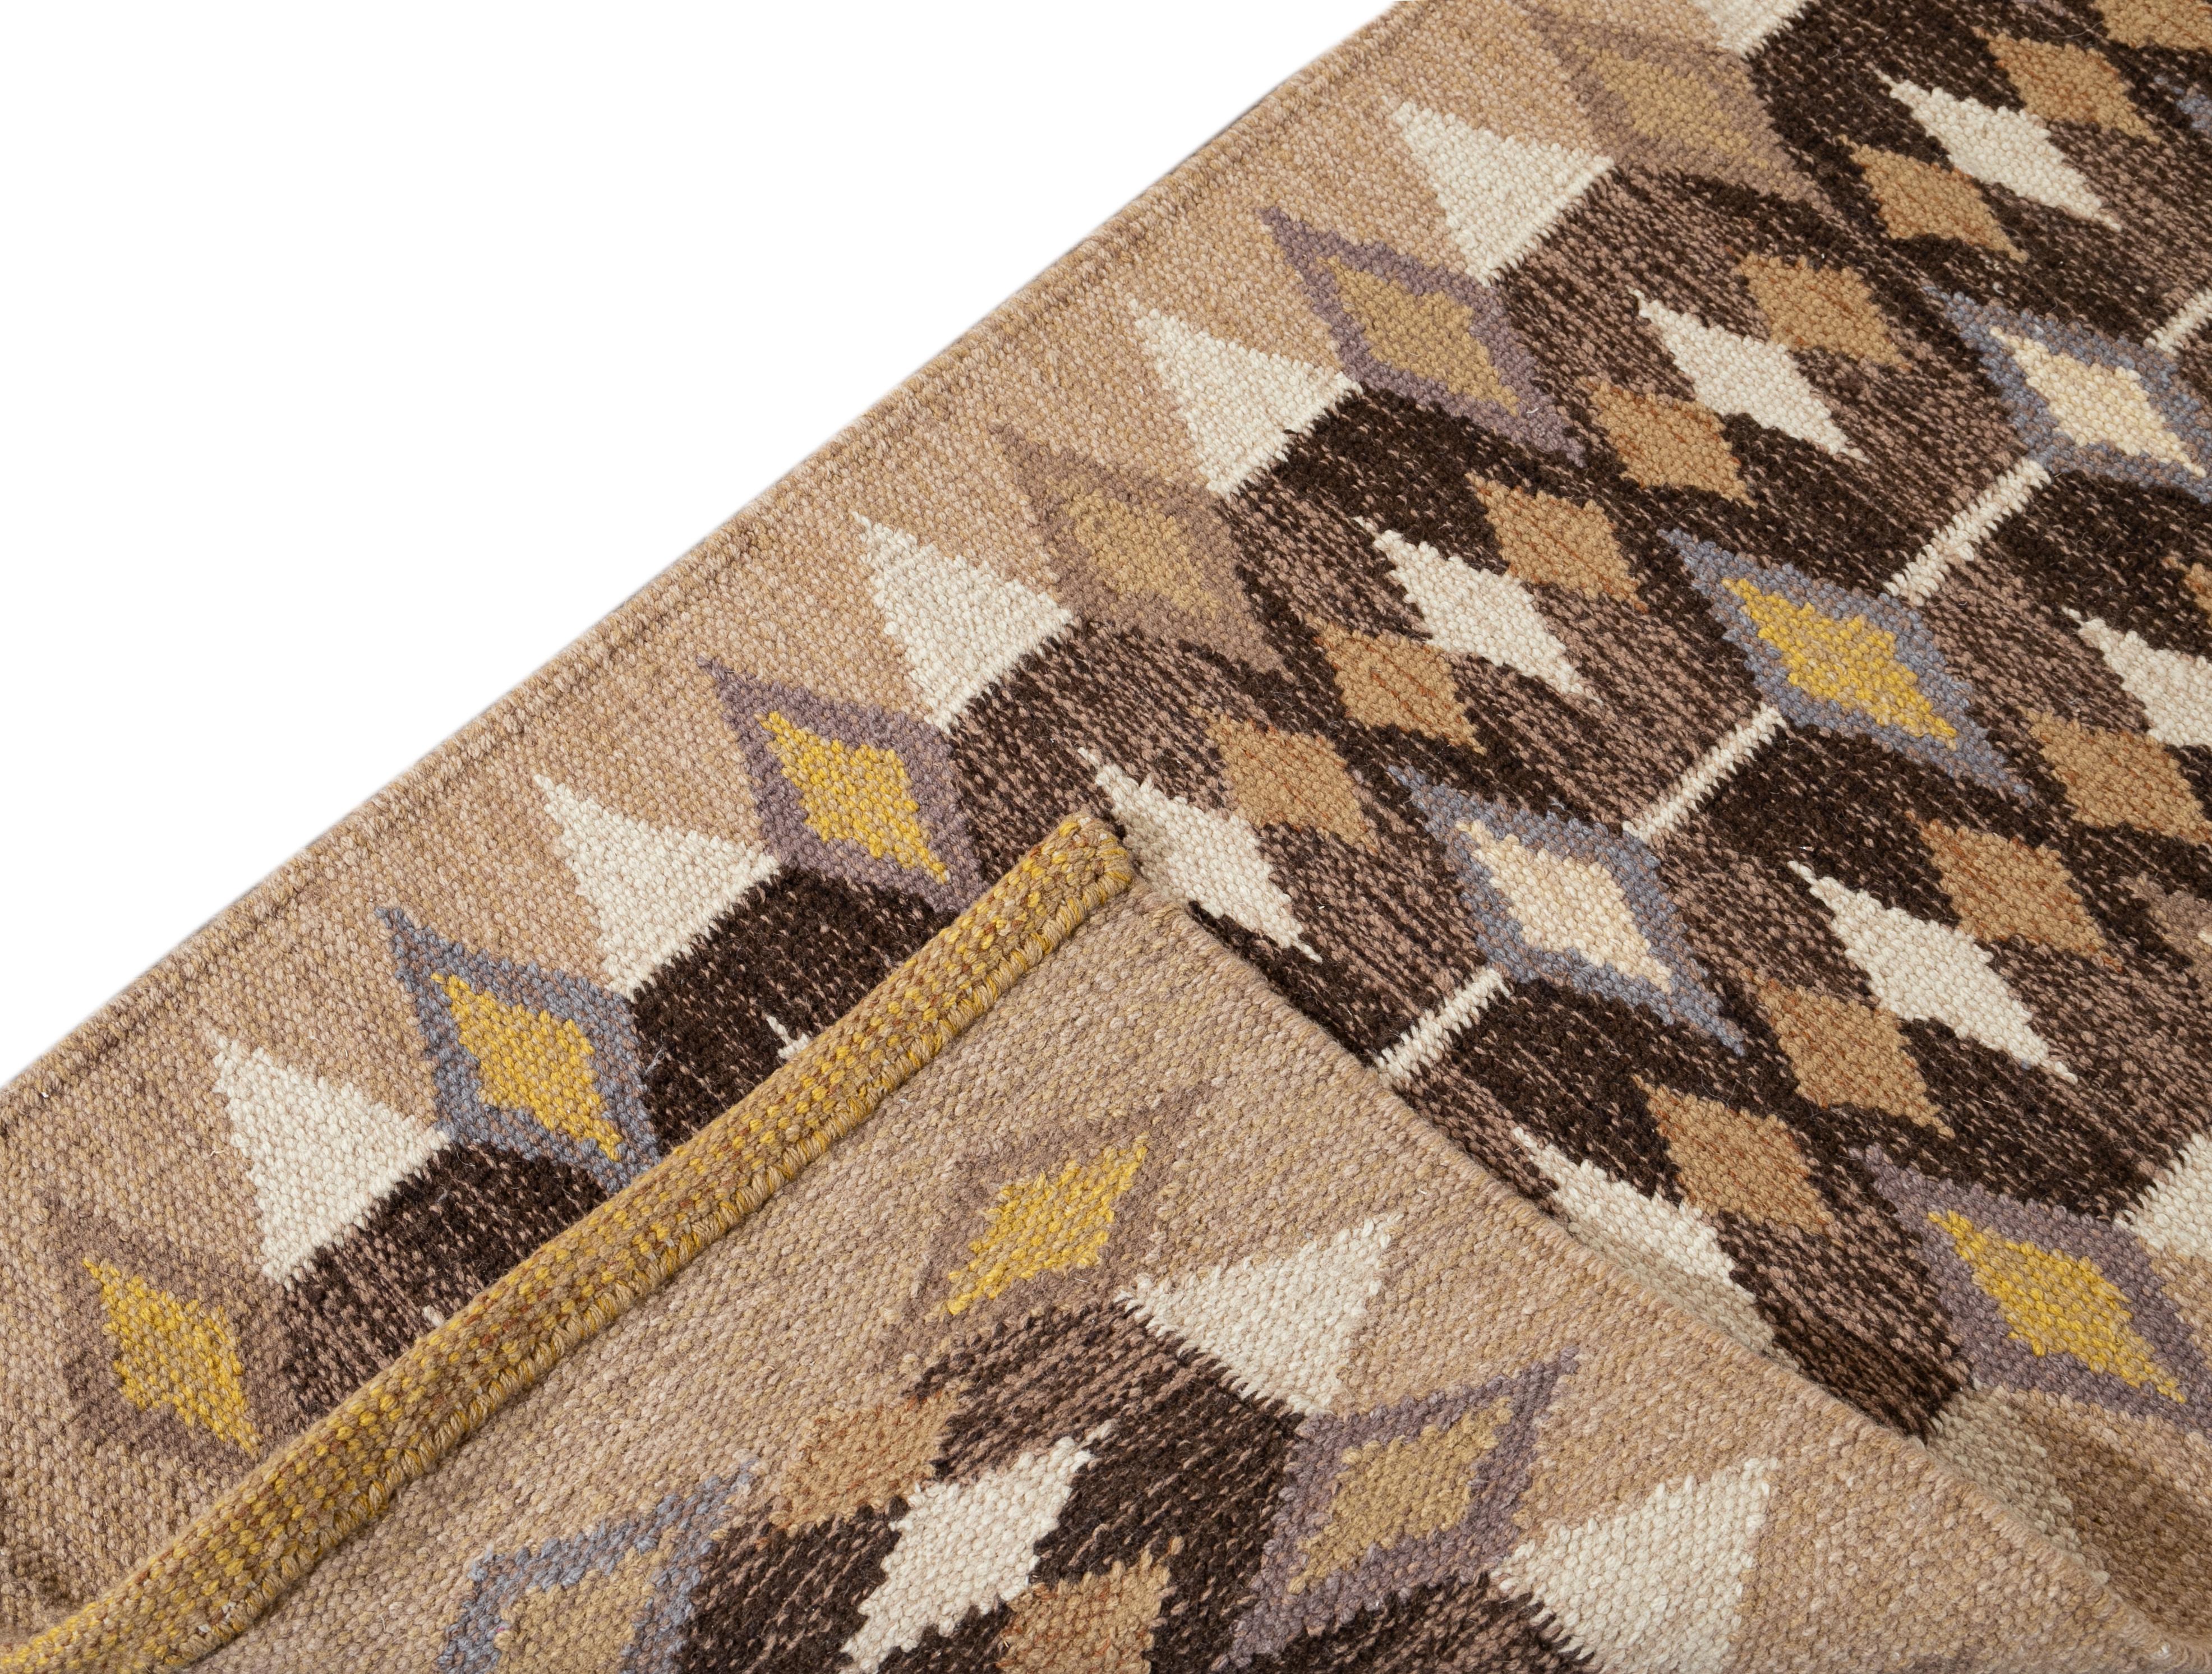 A 21st century modern Scandinavian-style flat-weave runner rug with a chocolate field and tan accents in an allover geometric design. This rug measures 2'9